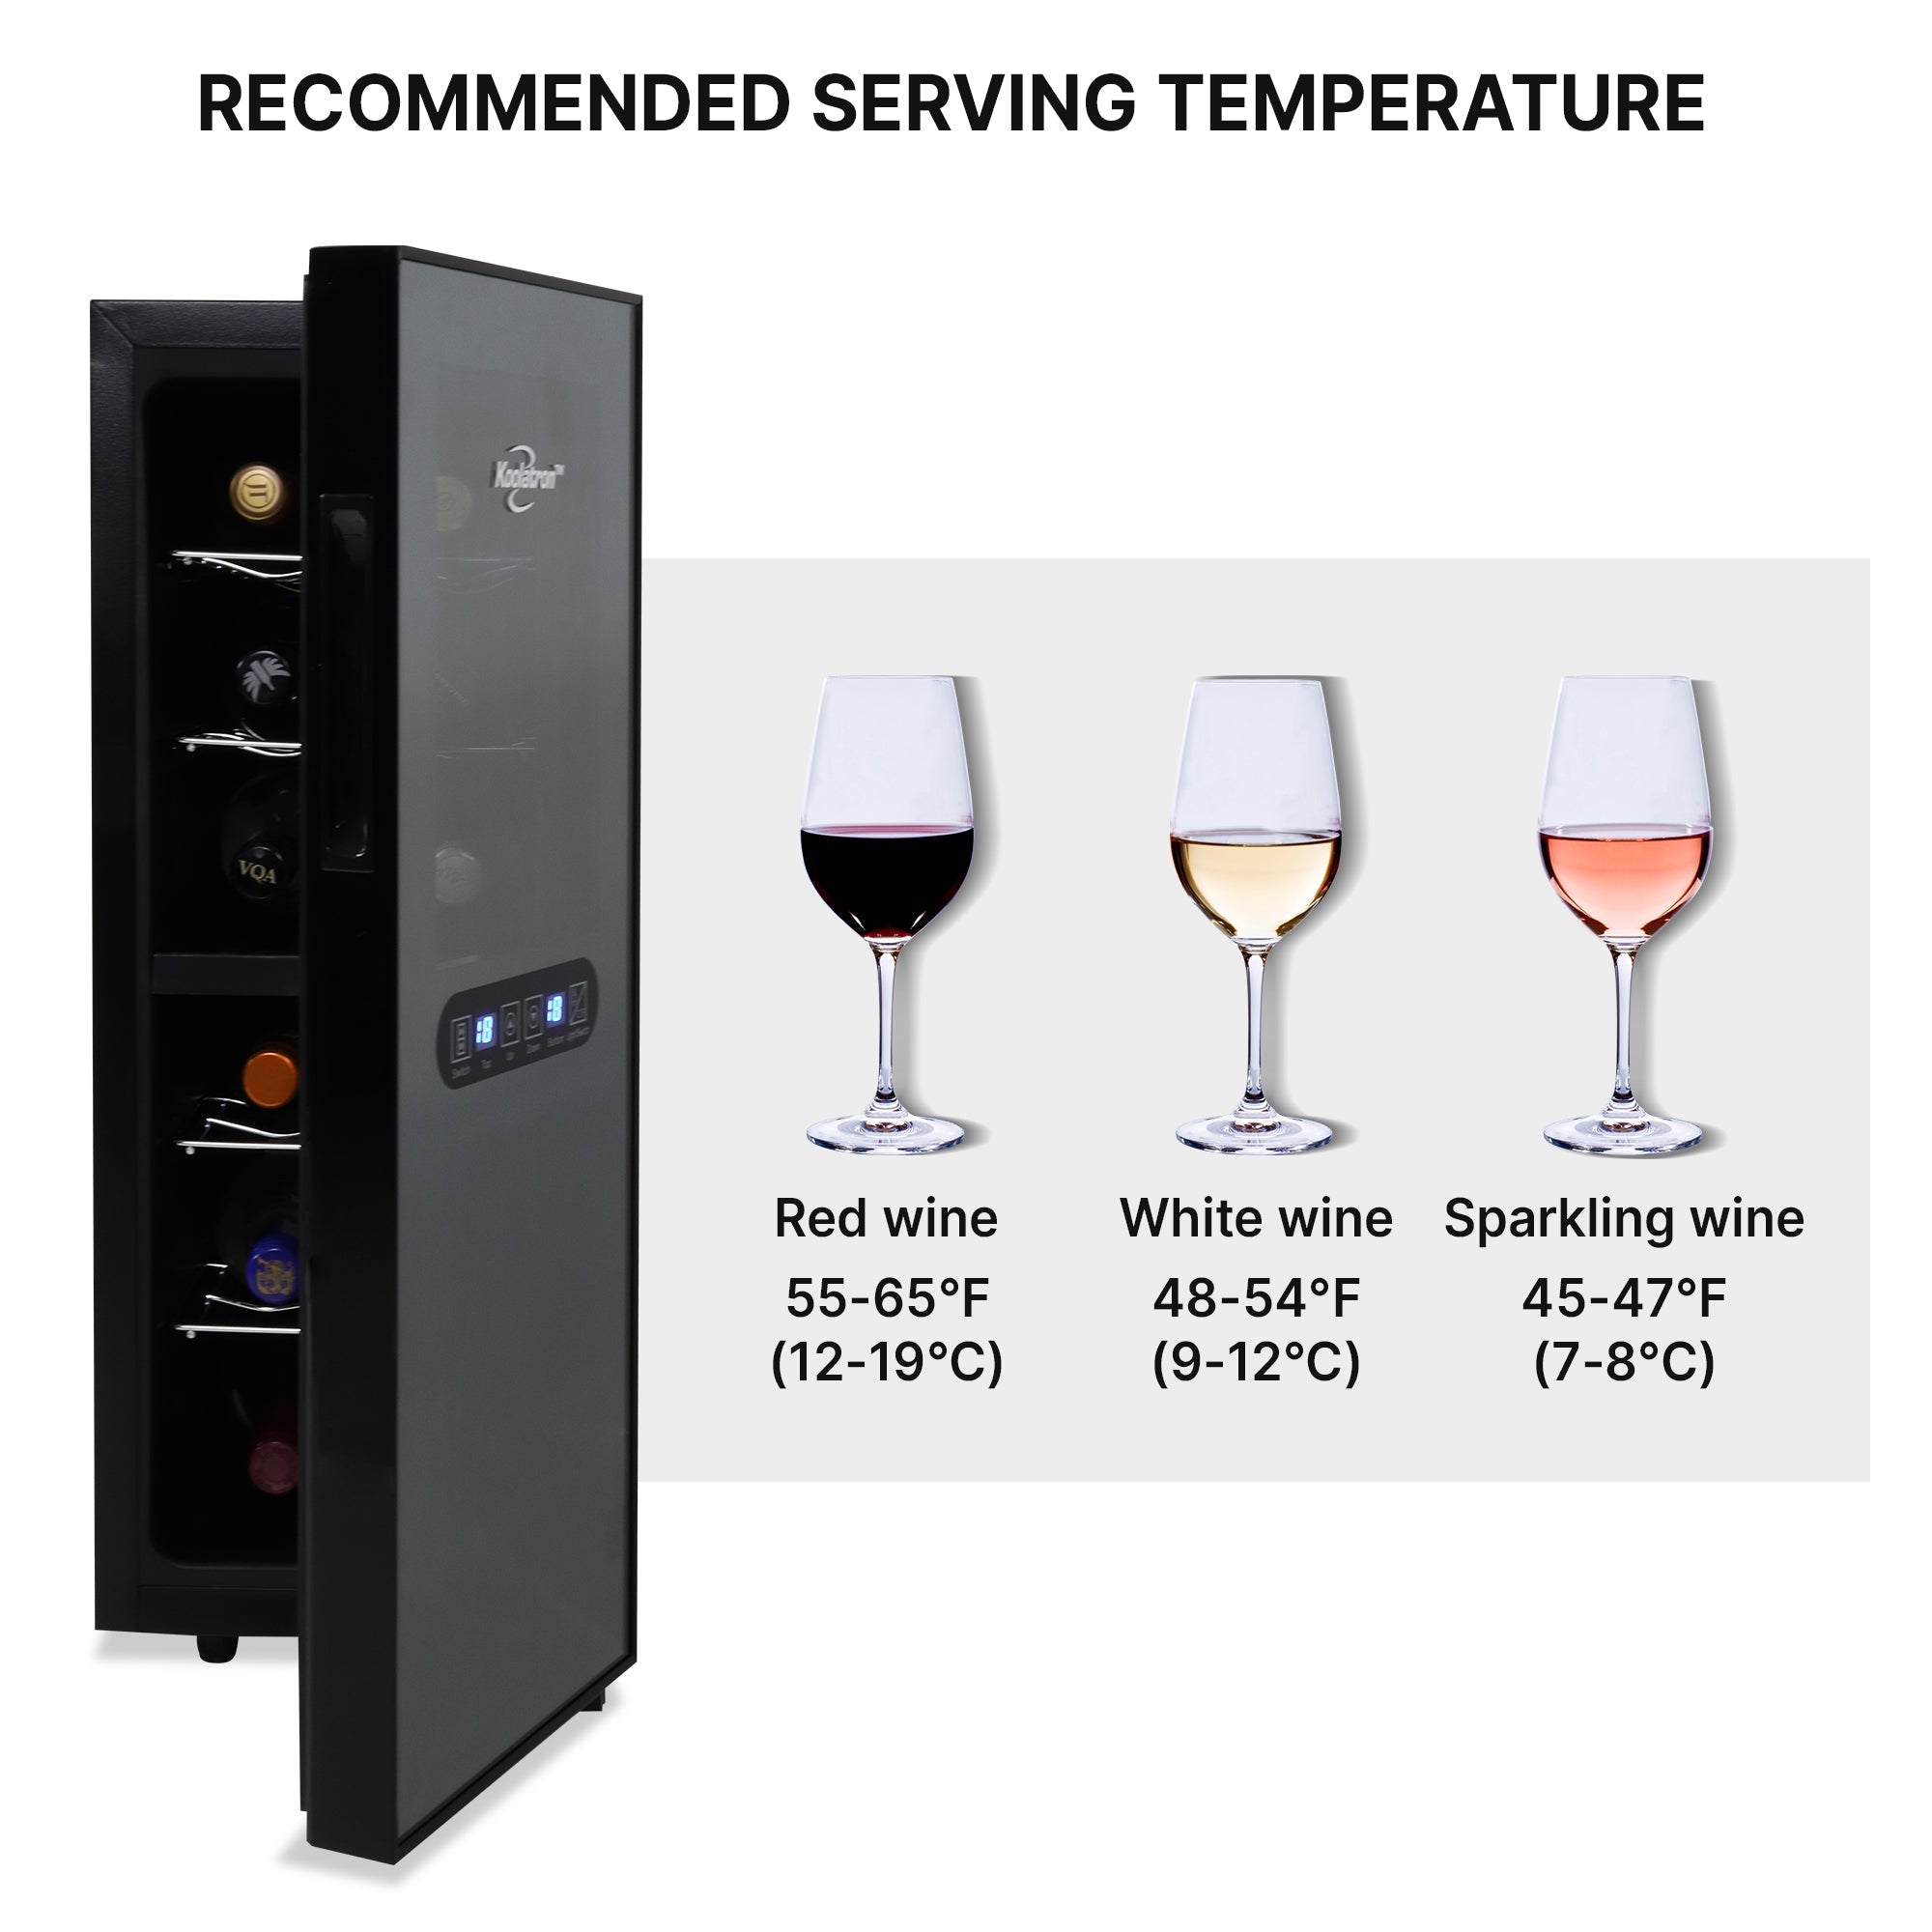 Koolatron 12 bottle dual zone wine fridge, open, with pictures of three wine glasses to the right containing red, white, and rose wines; Text above reads "Recommended serving temperature" and text below each glass describes the ideal temperature